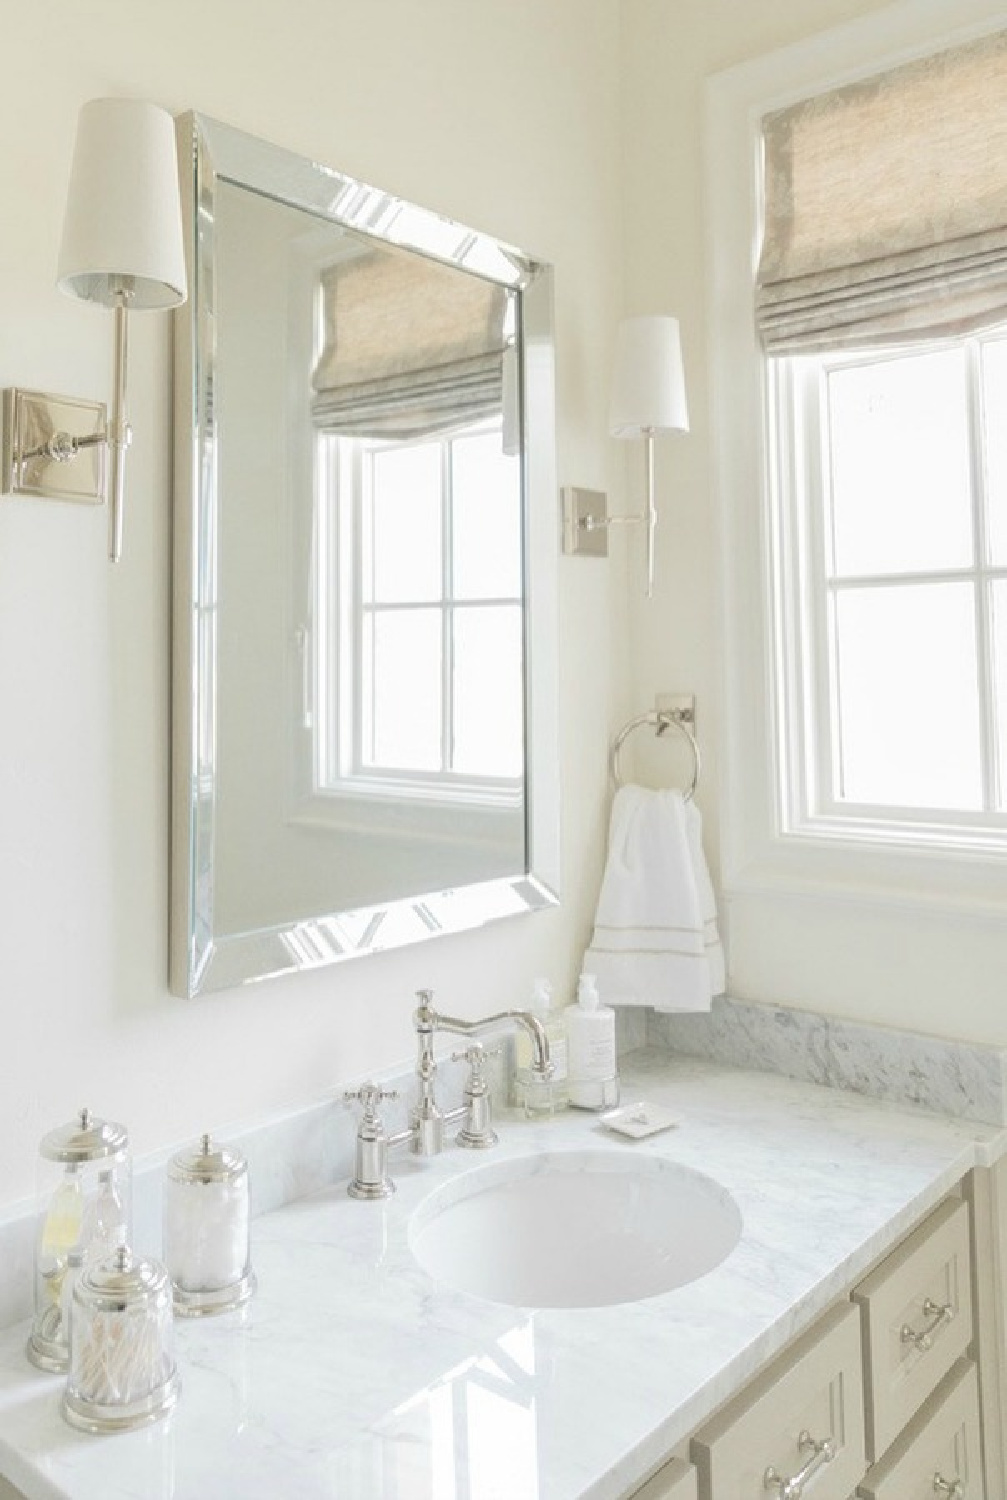 SW Alabaster in a French country bath with pale palette - Brit Jones.